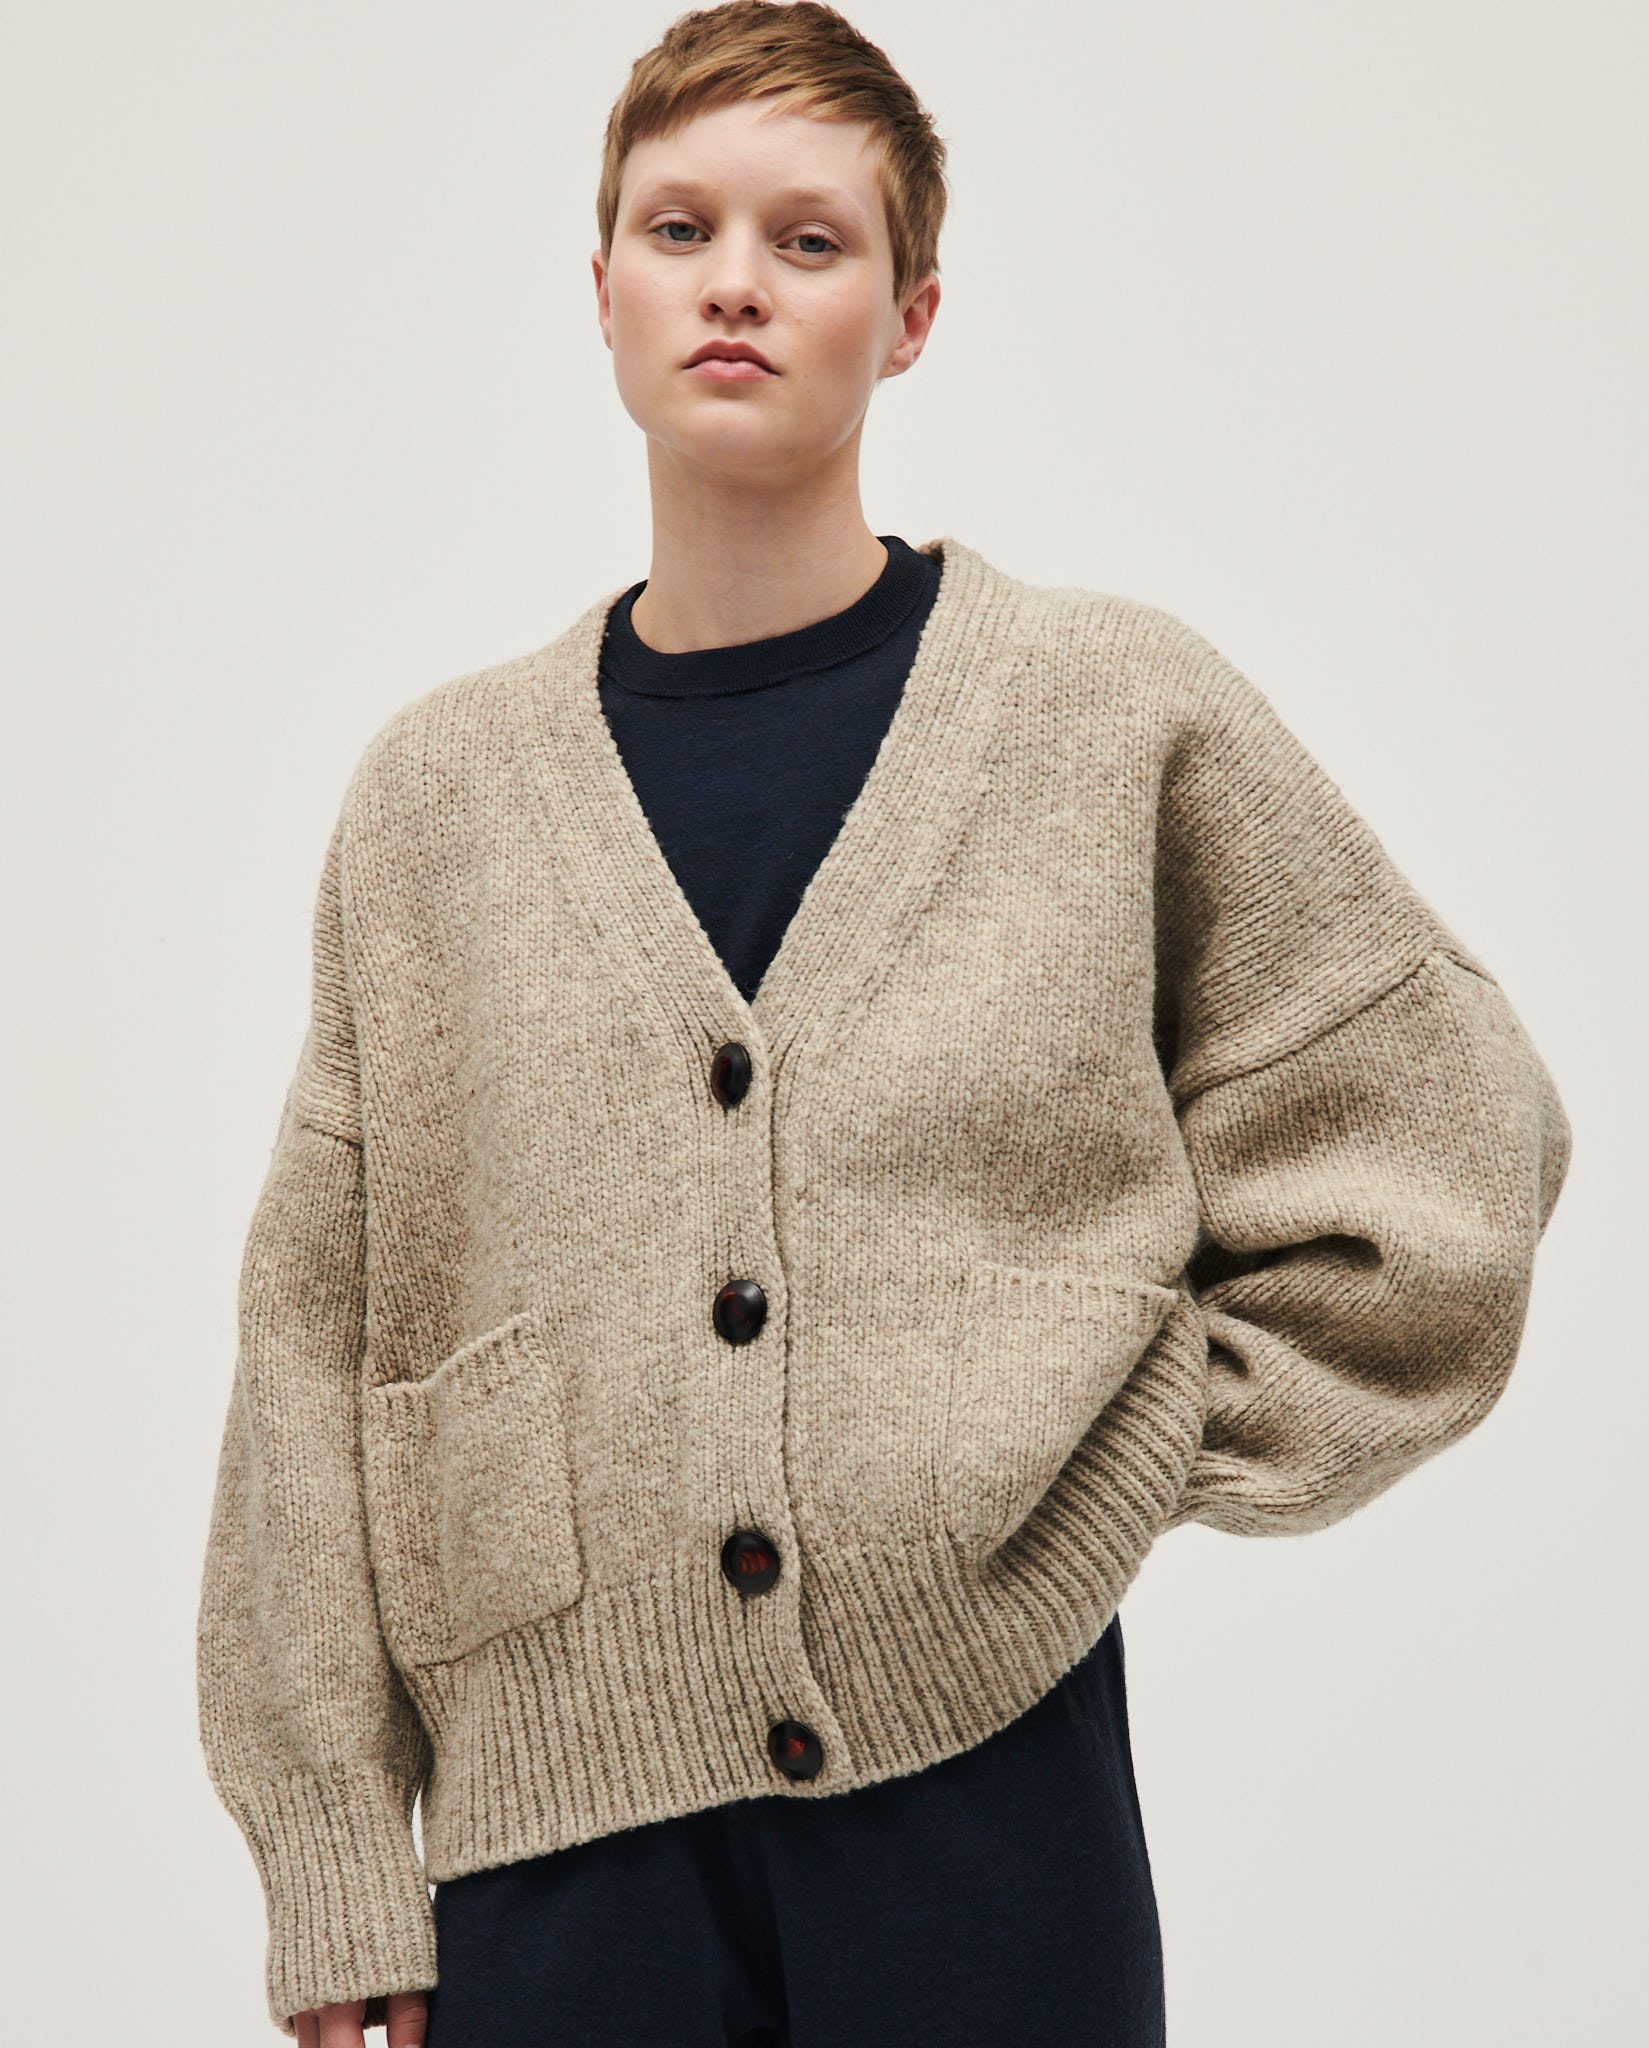 Bambü Ribbed Button Cardigan in Mist - Grace and Lace